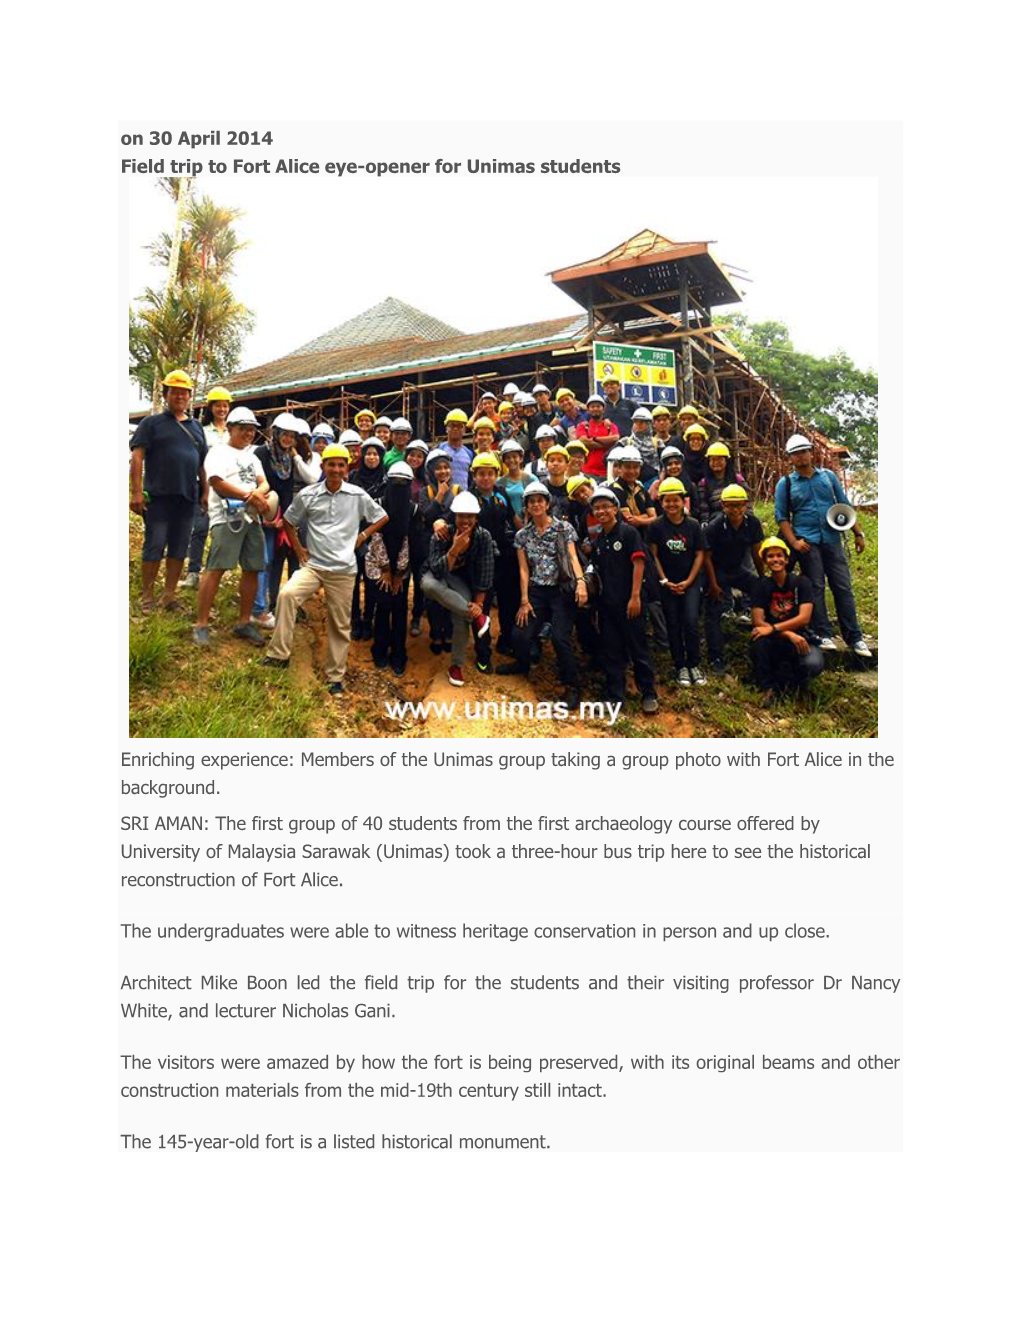 On 30 April 2014 Field Trip to Fort Alice Eye-Opener for Unimas Students